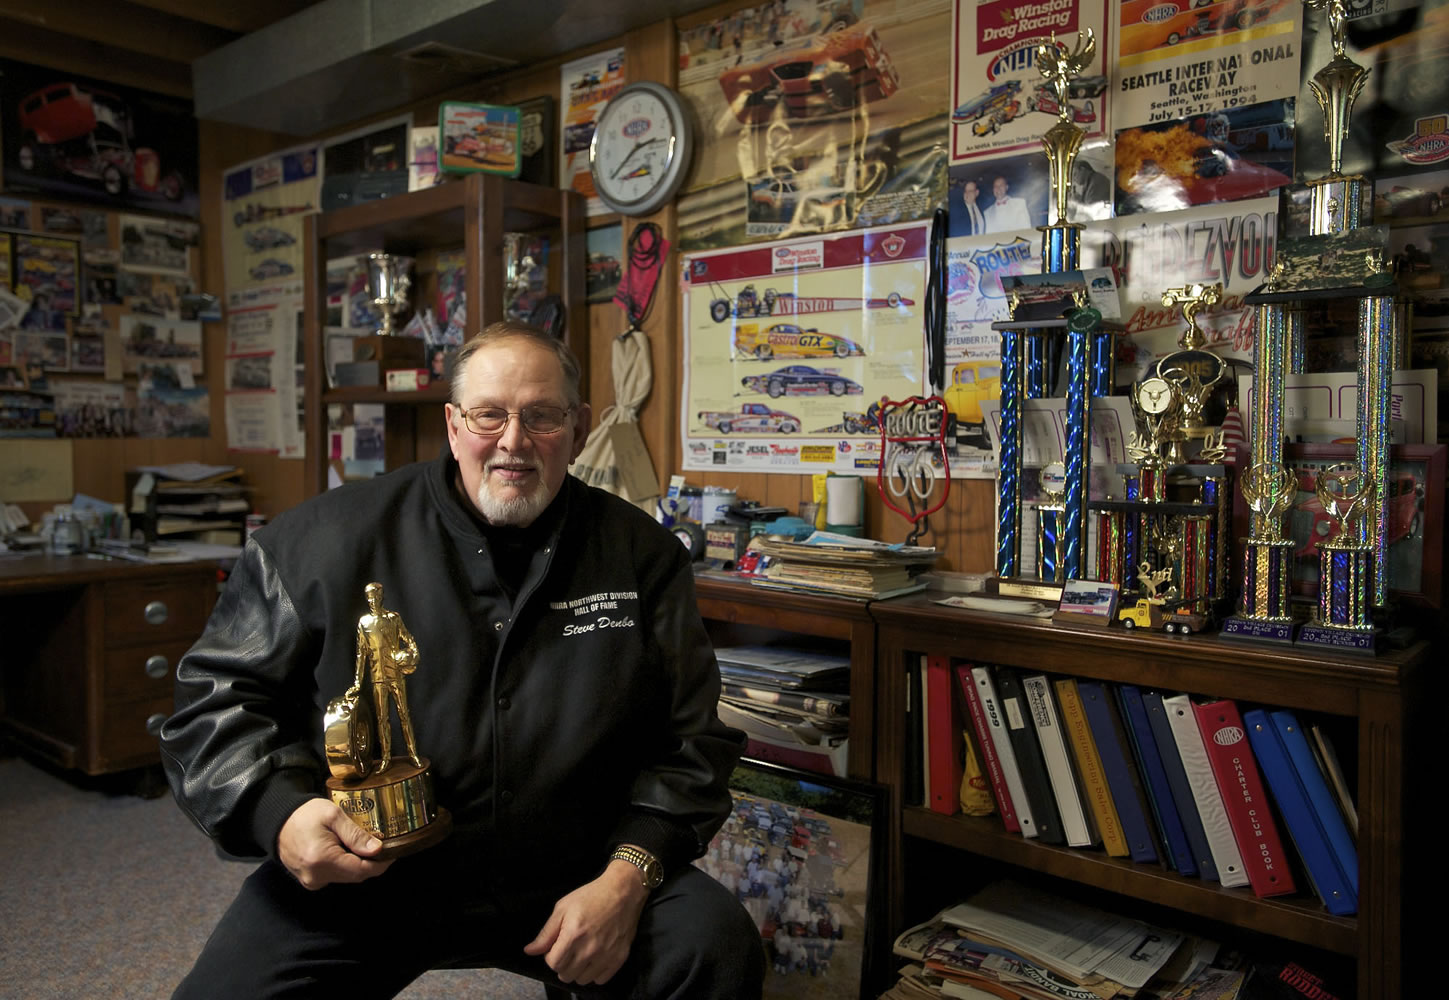 Steve Denbo in his Hazel Dell home with the trophy that he received from the NHRA Hall of Fame for the Pacific Northwest in SeaTac.